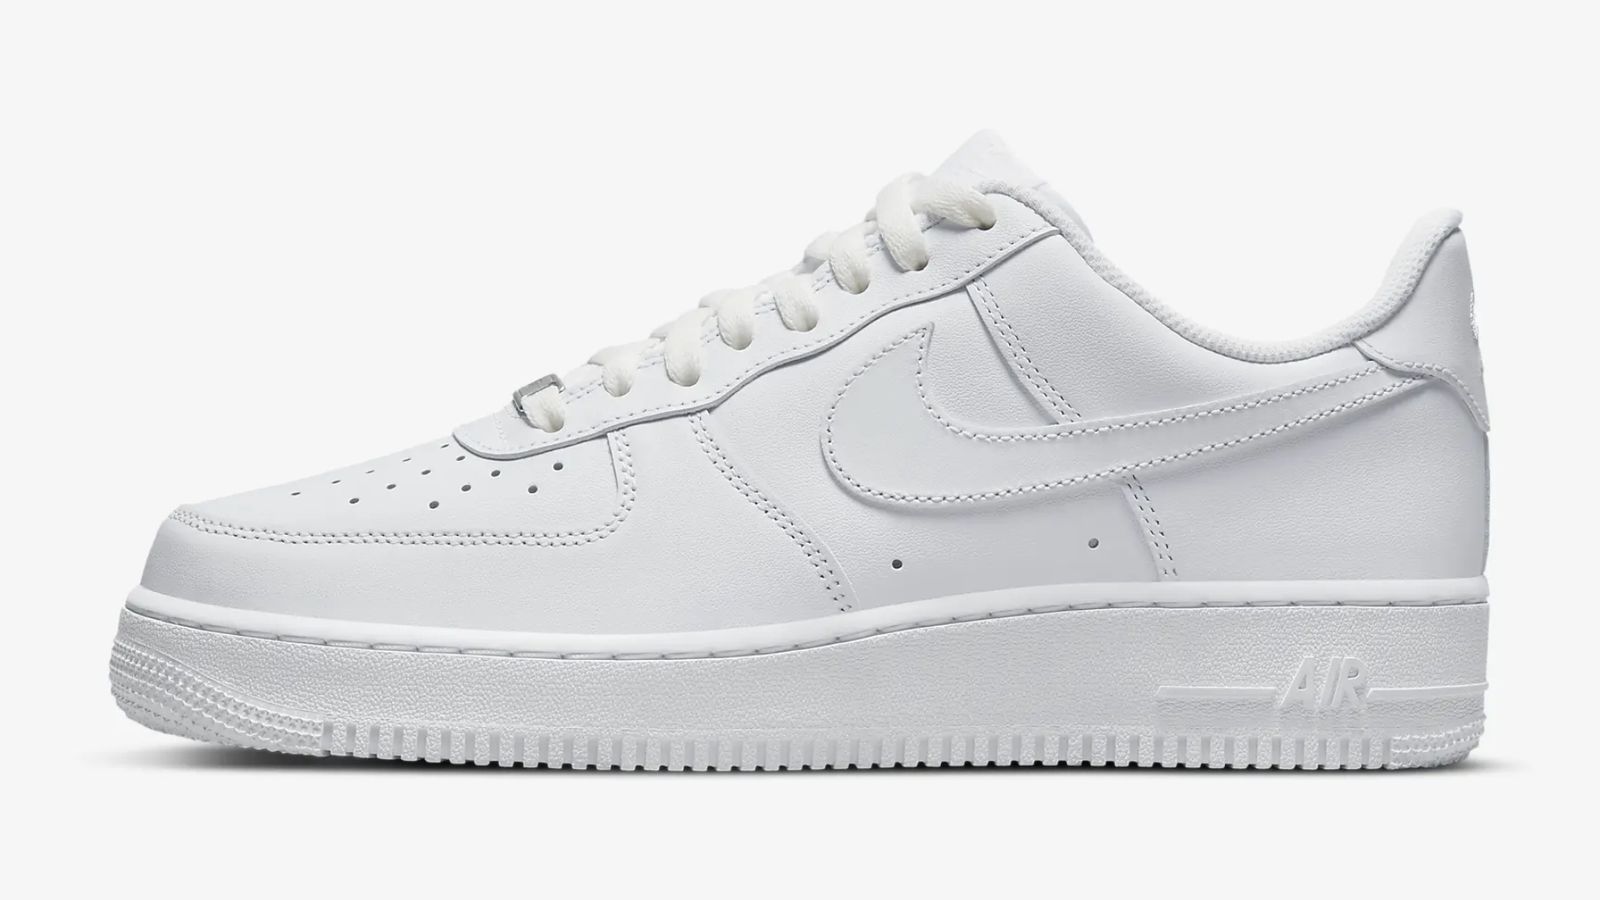 Nike Air Force 1 product image of an all-white low-top sneaker.